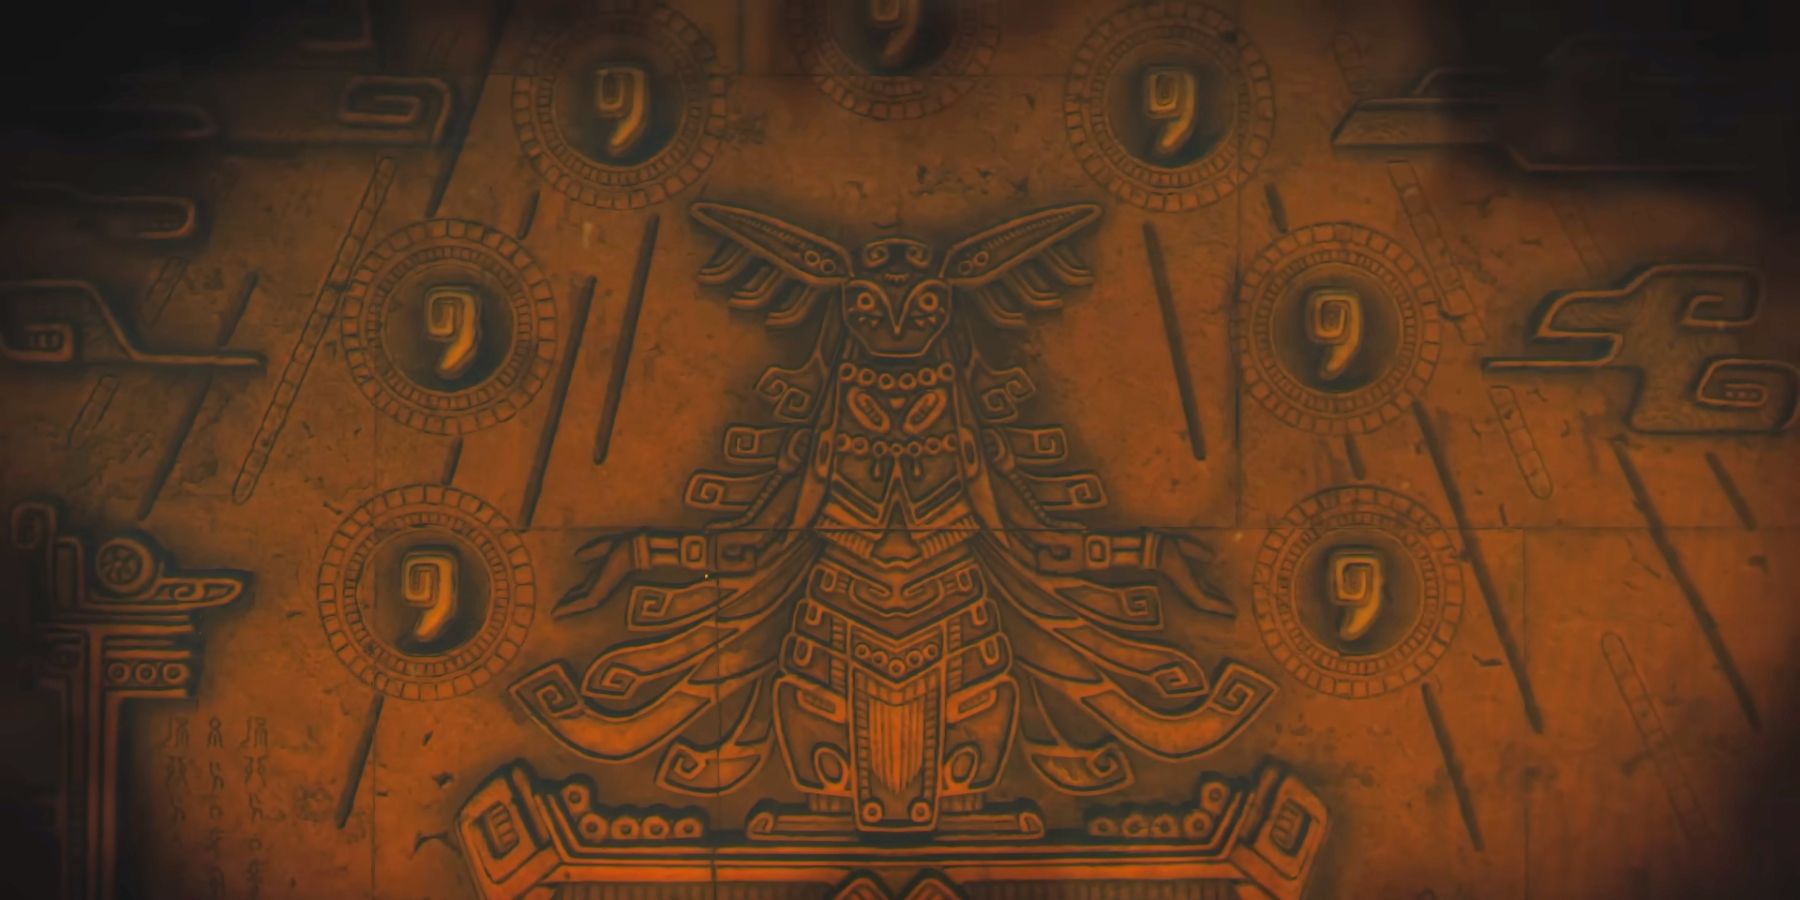 An image of a stone carving in TOTK's trailer showing seven teardrops surrounding a figure.